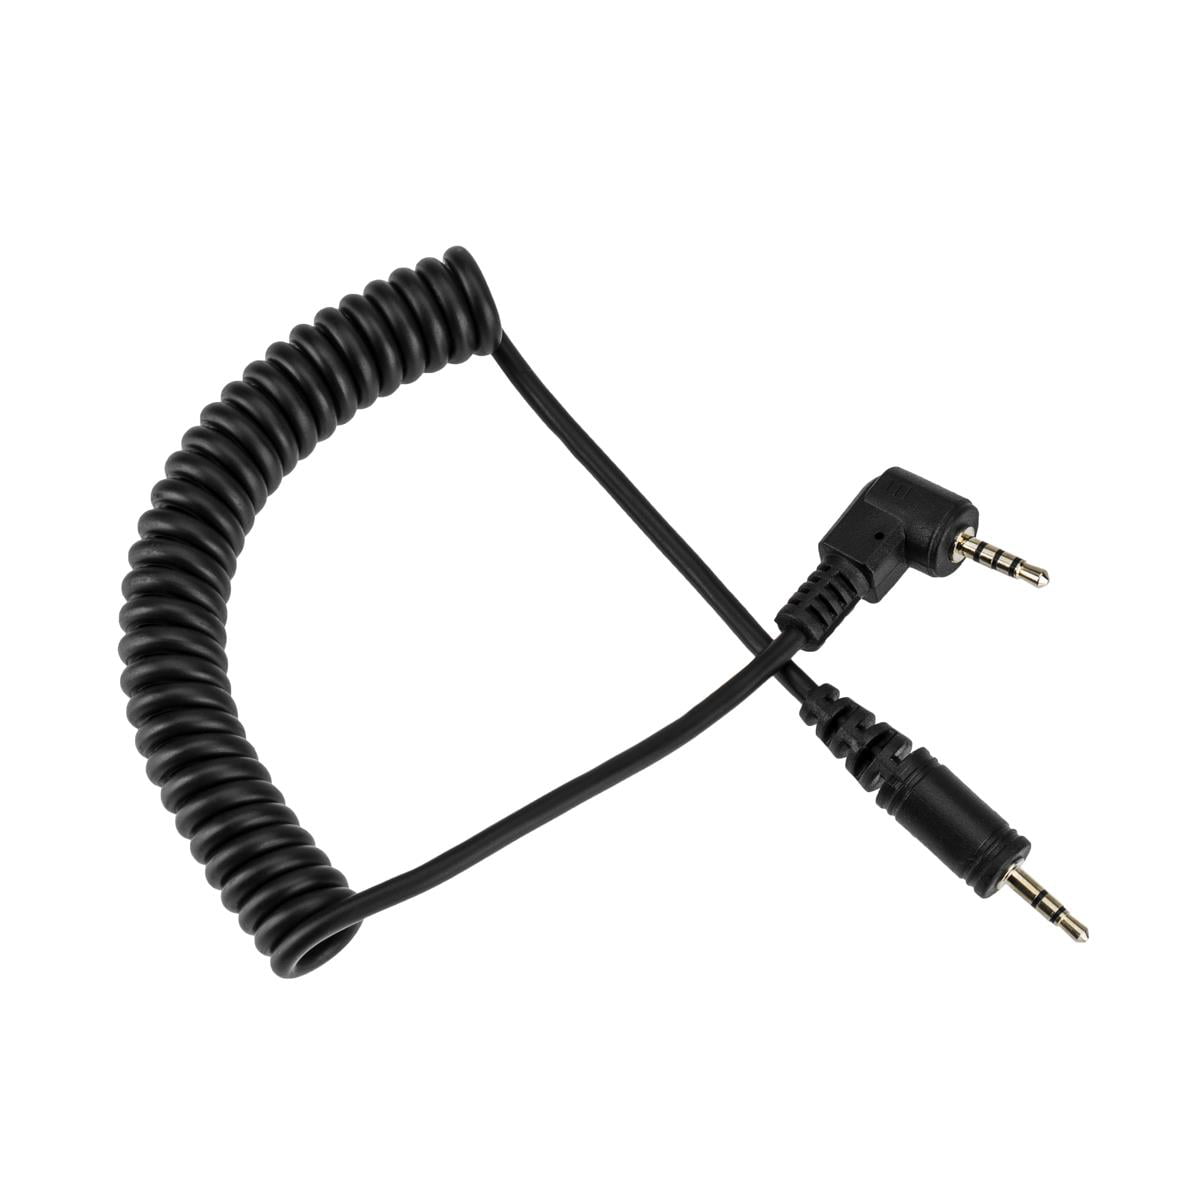 Flashpoint Wave Commander Camera Release Cable for Panasonic/Lumix 